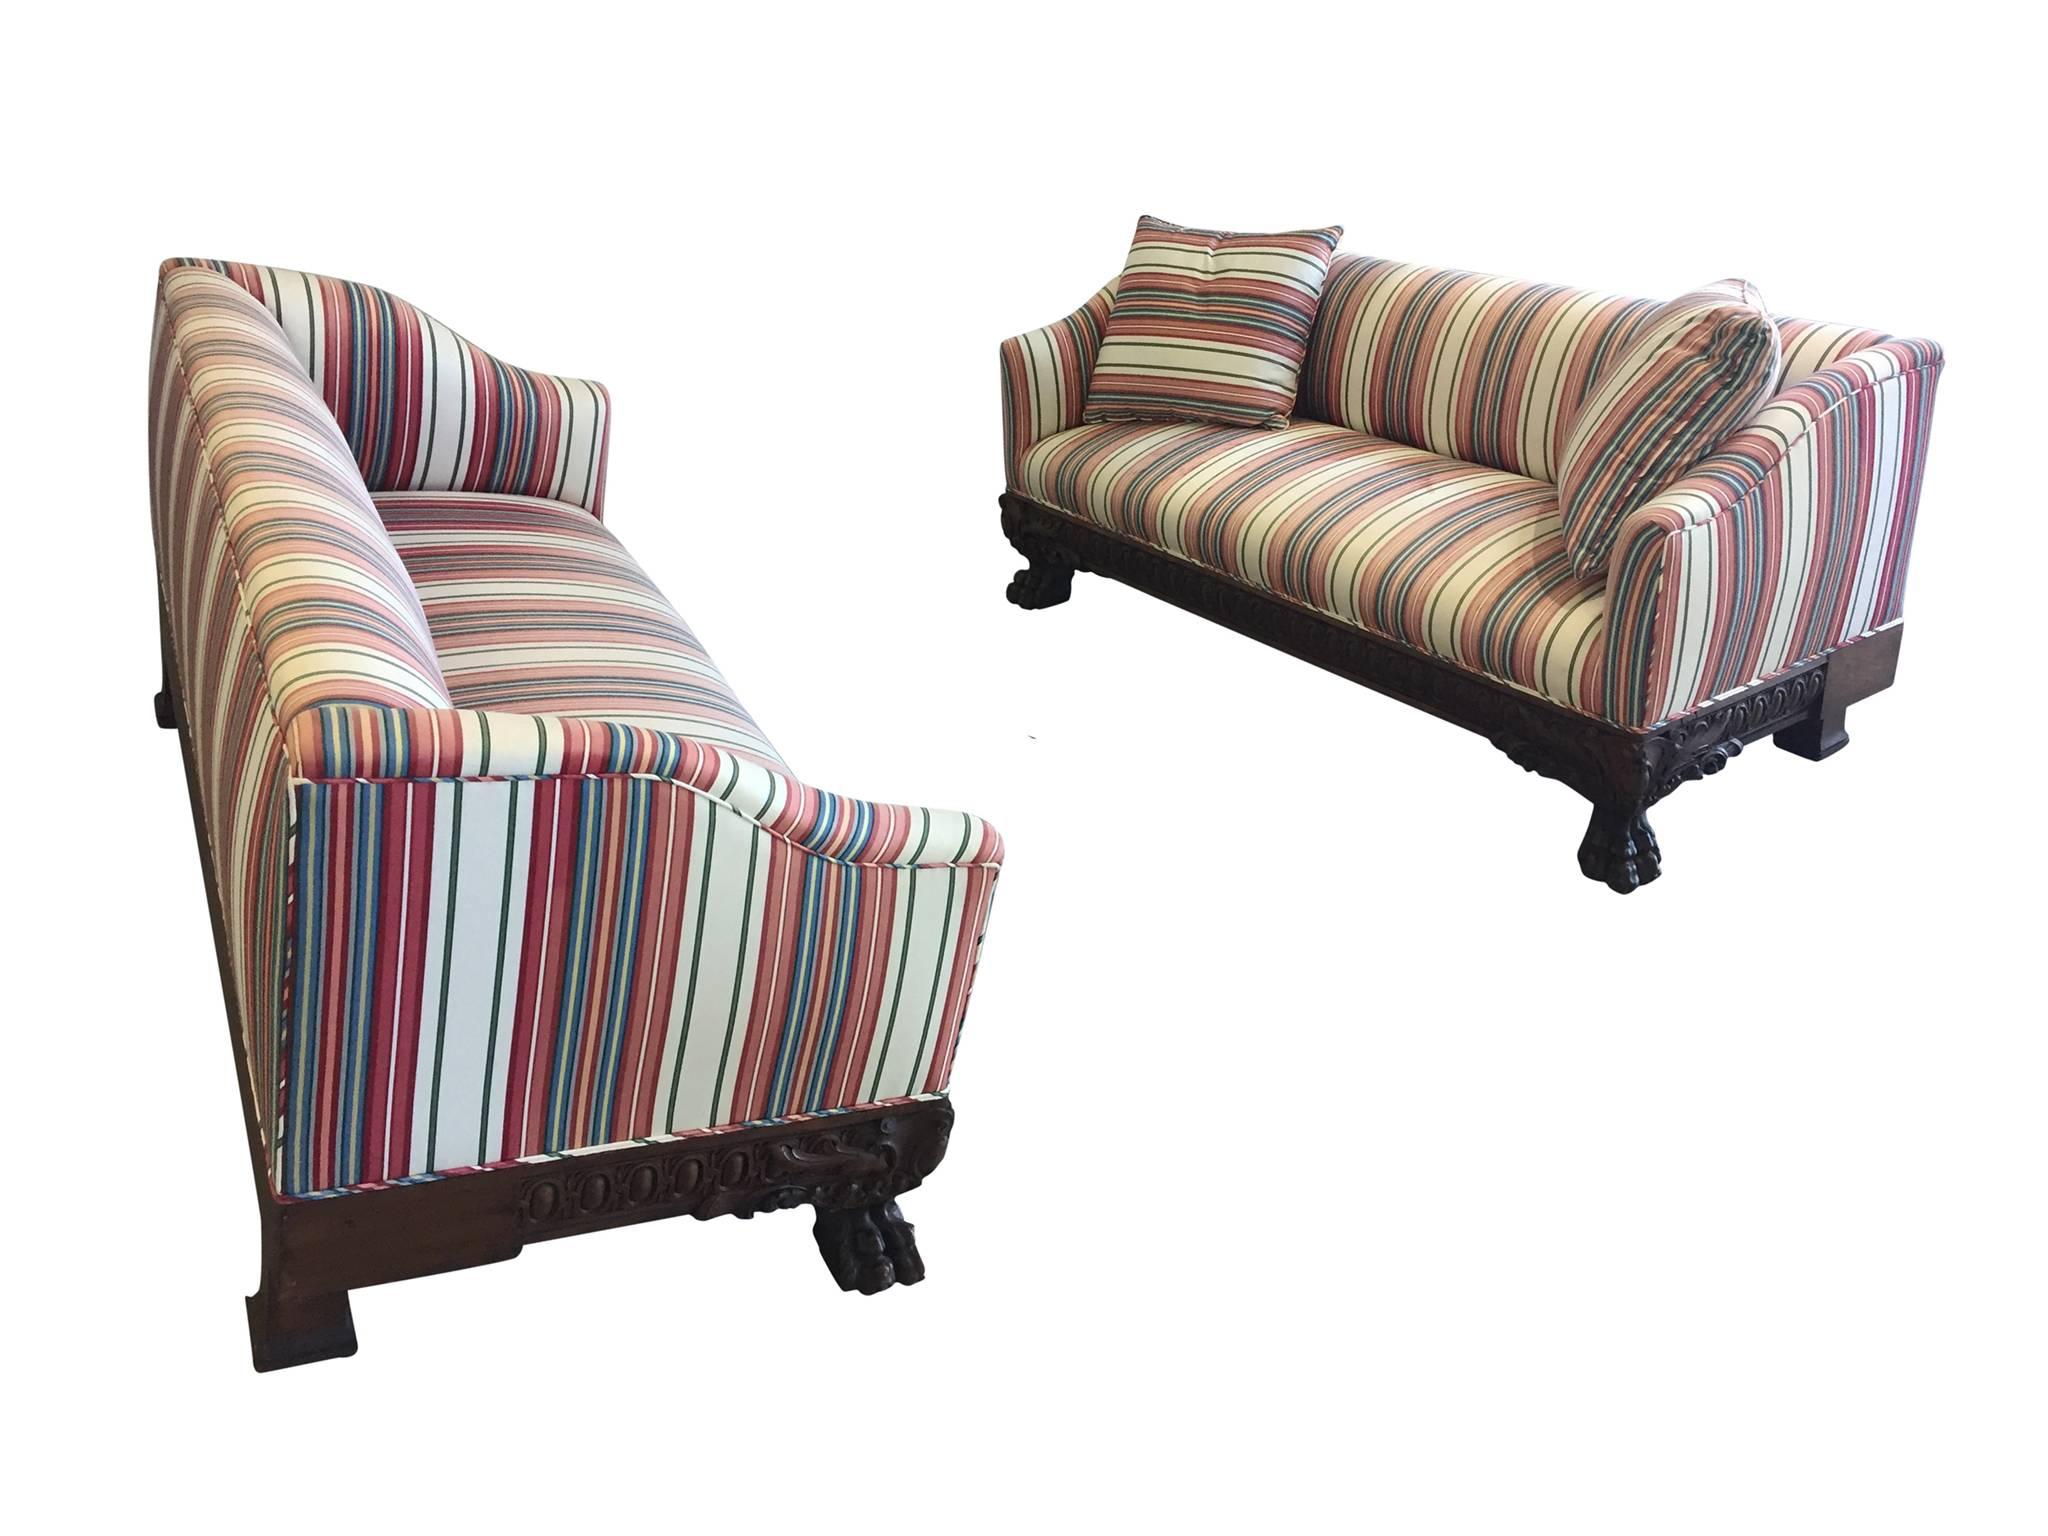 Hand-Carved 19th Century Victorian Carved Wood Sofas in Striped Silk, a Pair